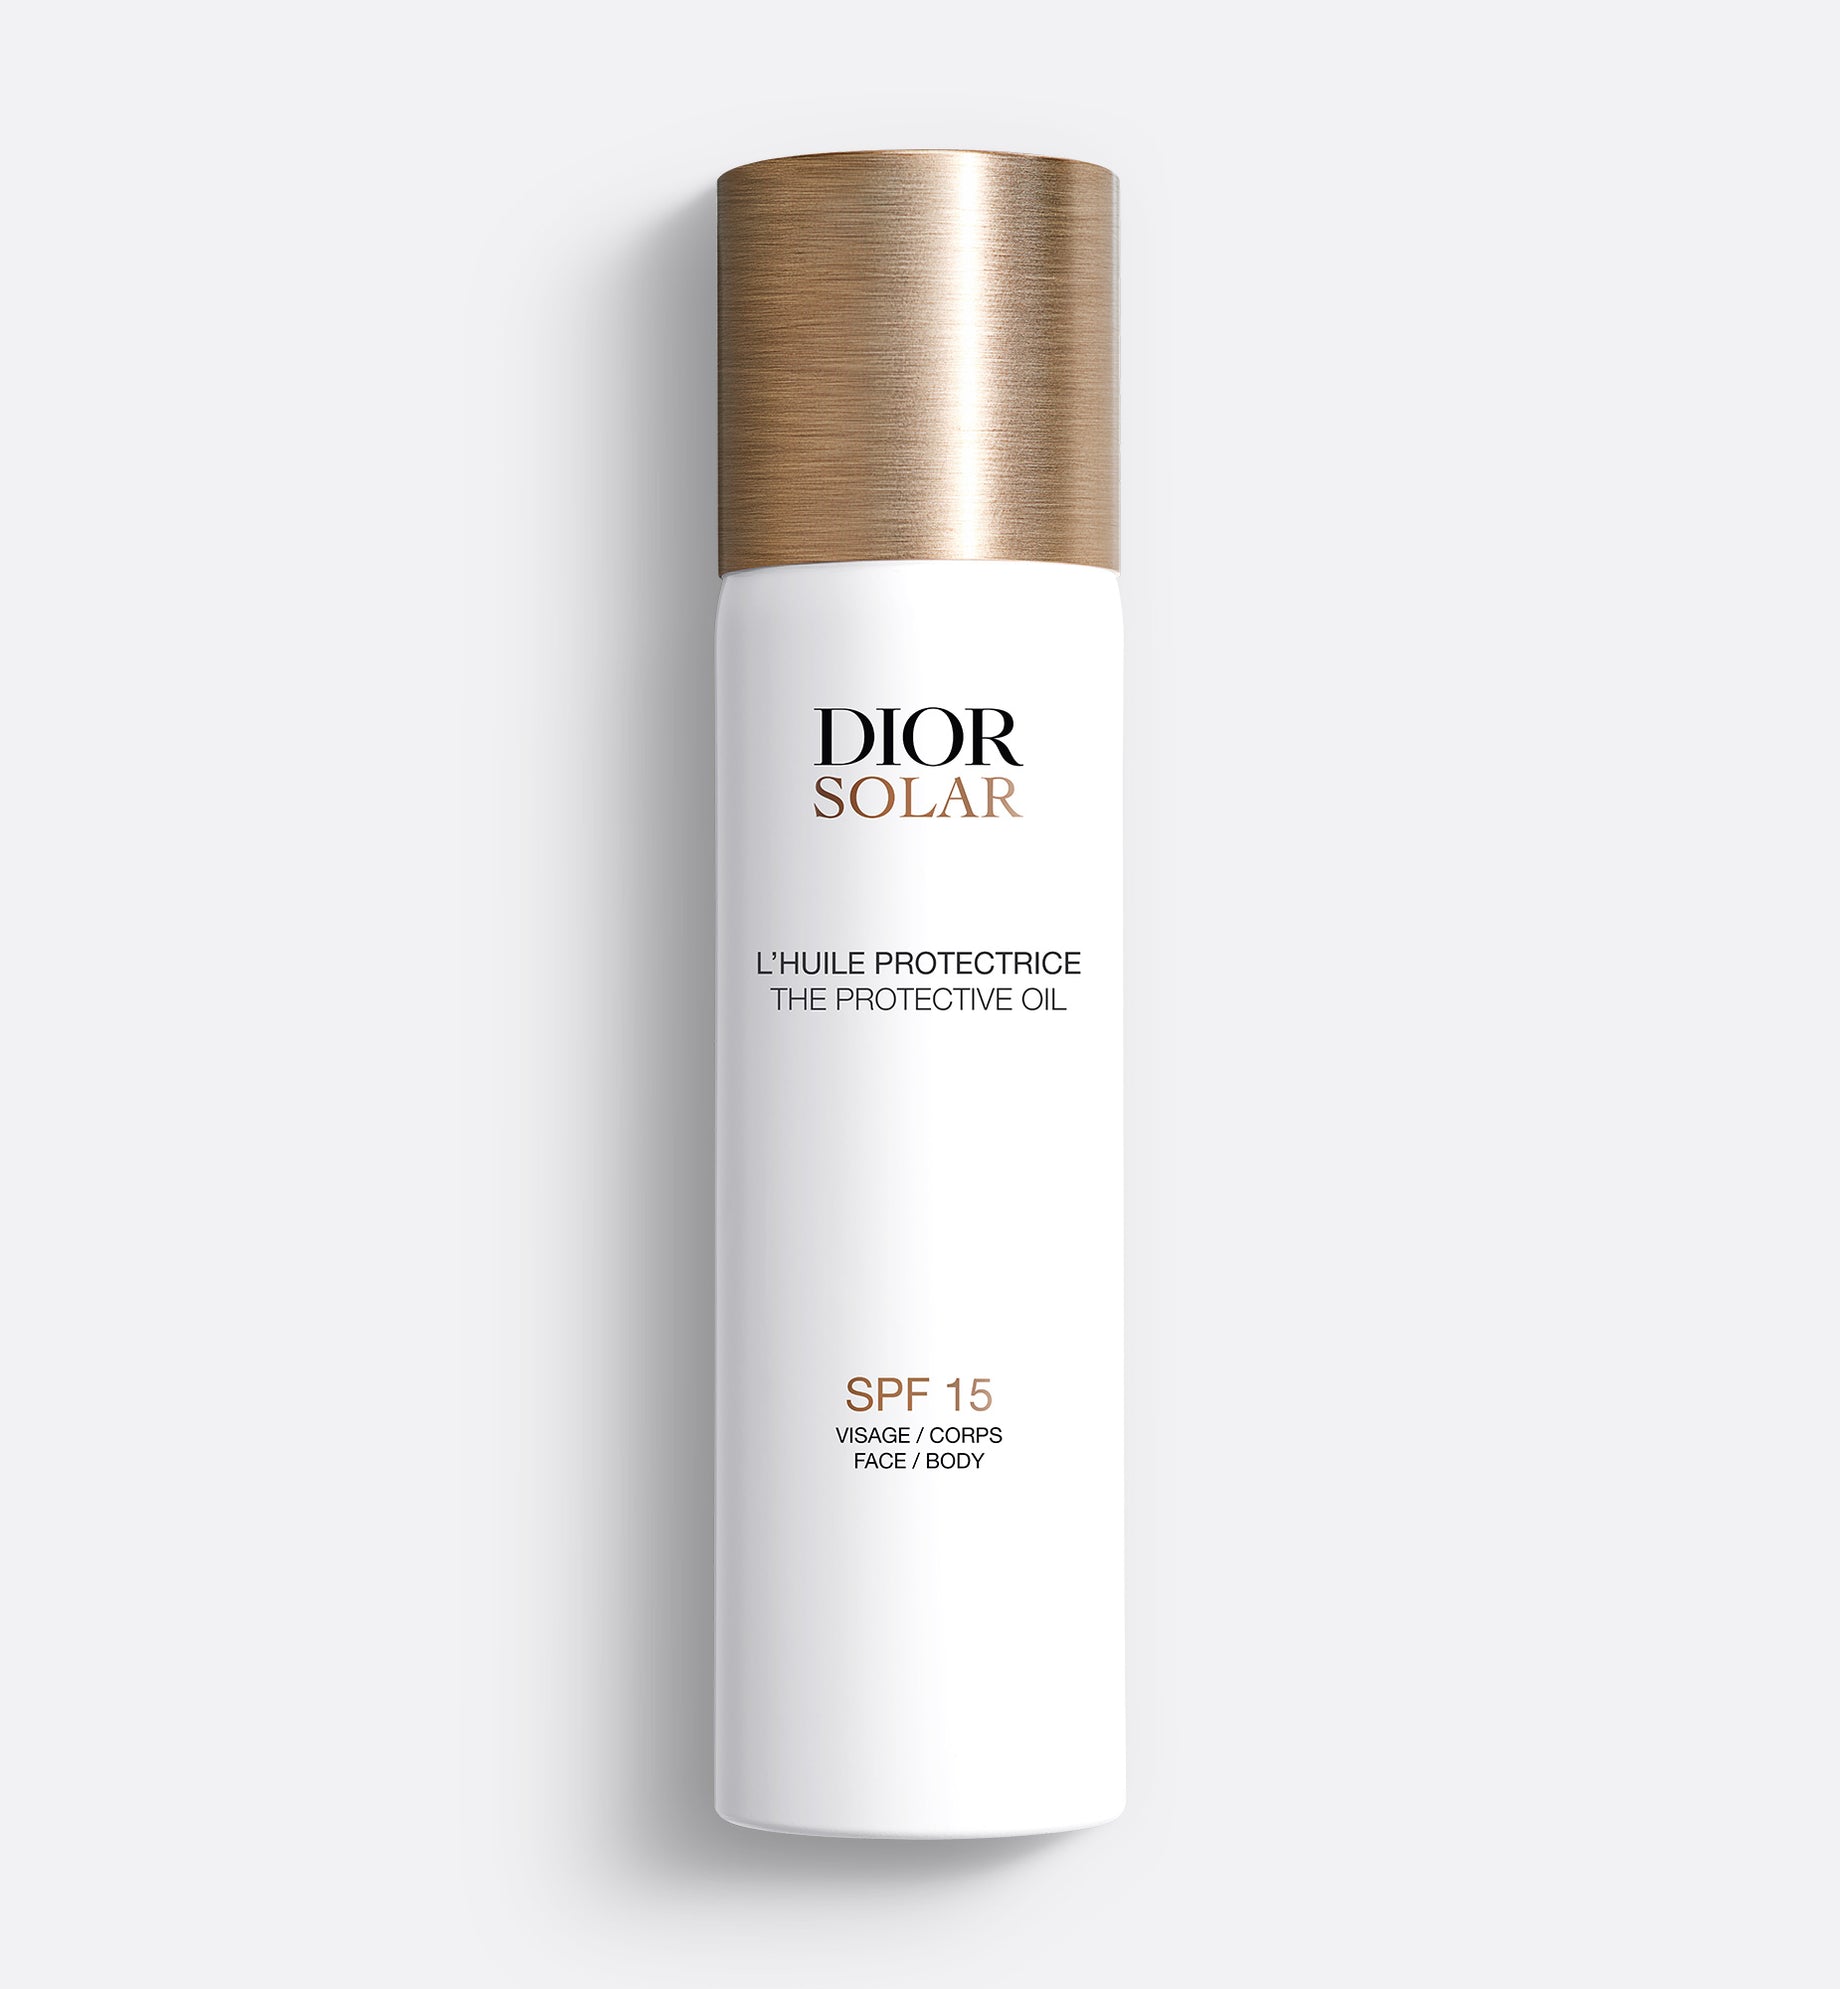 DIOR SOLAR THE PROTECTIVE FACE AND BODY OIL SPF 15